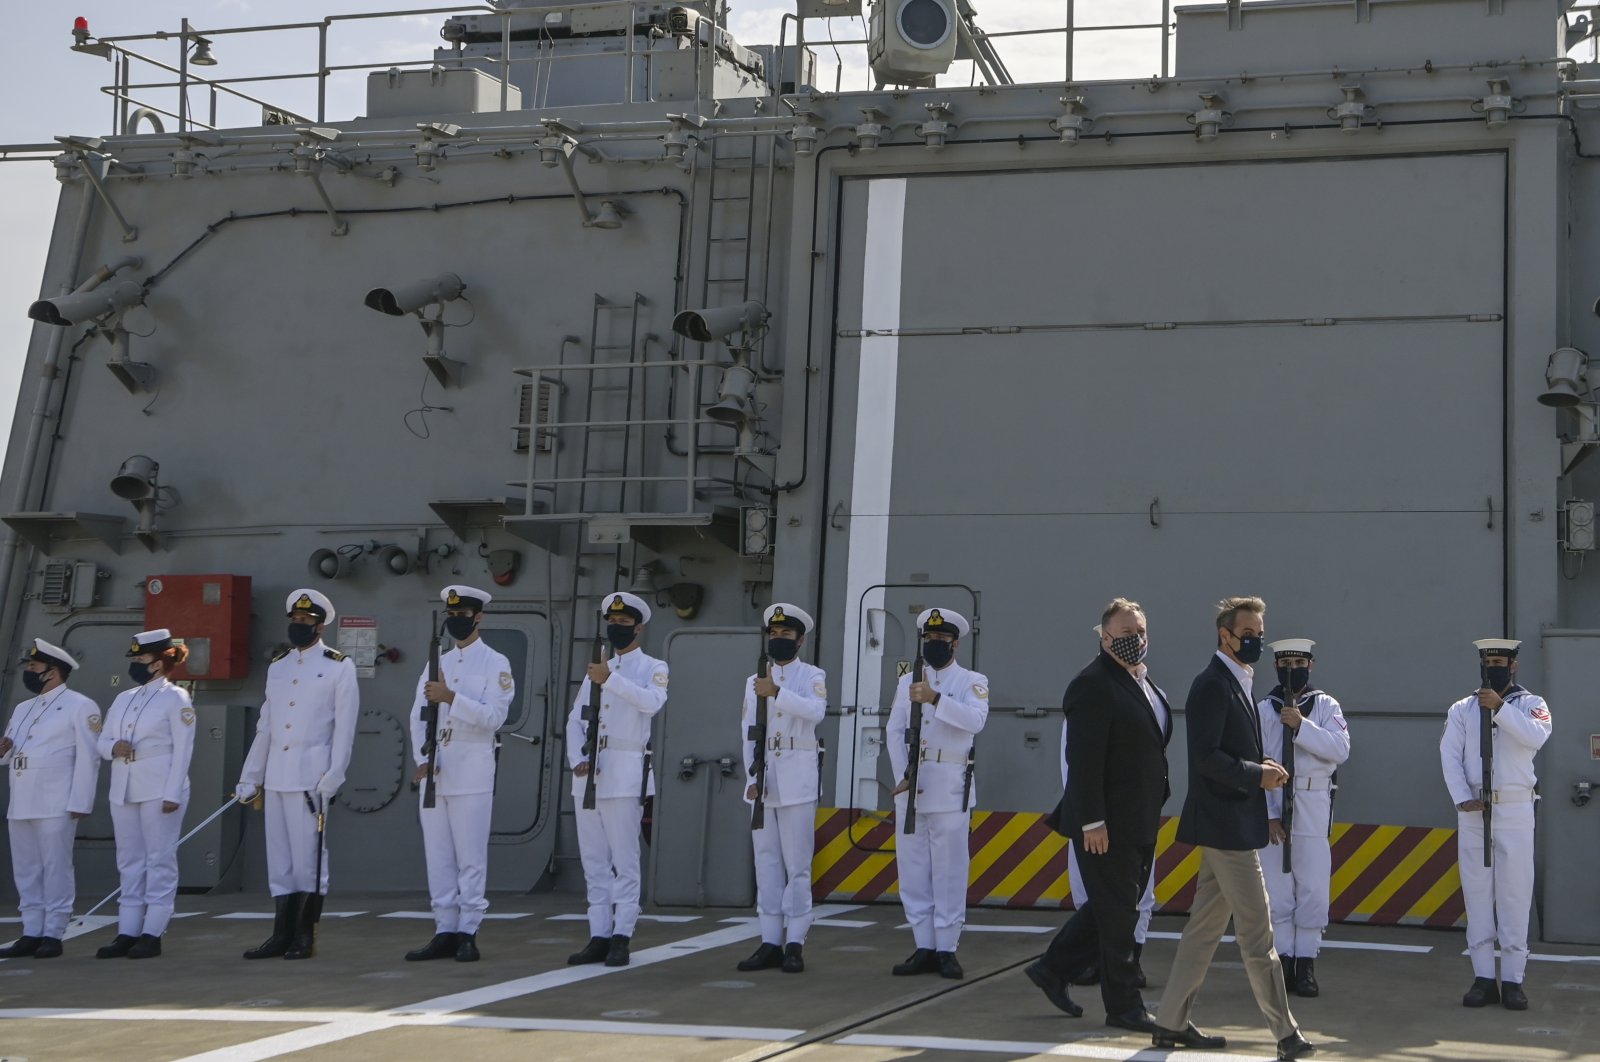 U.S. Secretary of State Mike Pompeo, (L), and Greek Prime Minister Kyriakos Mitsotakis visit the Greek frigate Salamis at the Naval Support Activity base at Souda, on the Greek island of Crete, Tuesday, Sept. 29, 2020. (AP File Photo)